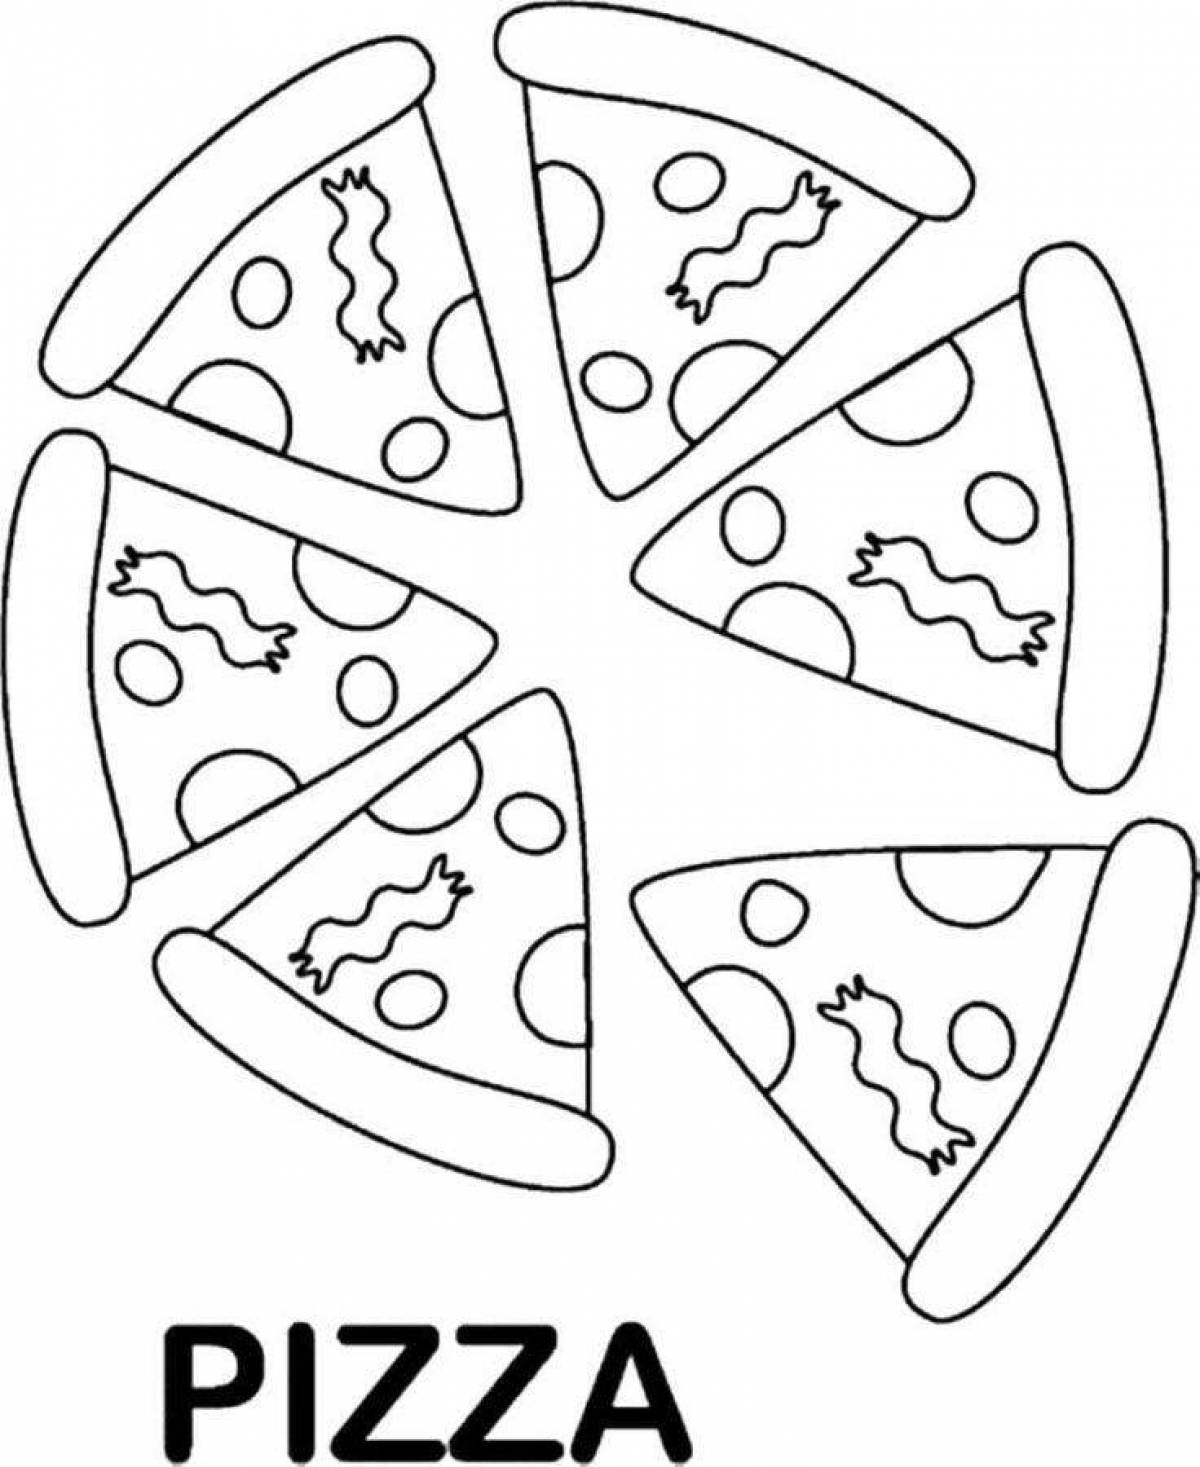 Fun paper food coloring page